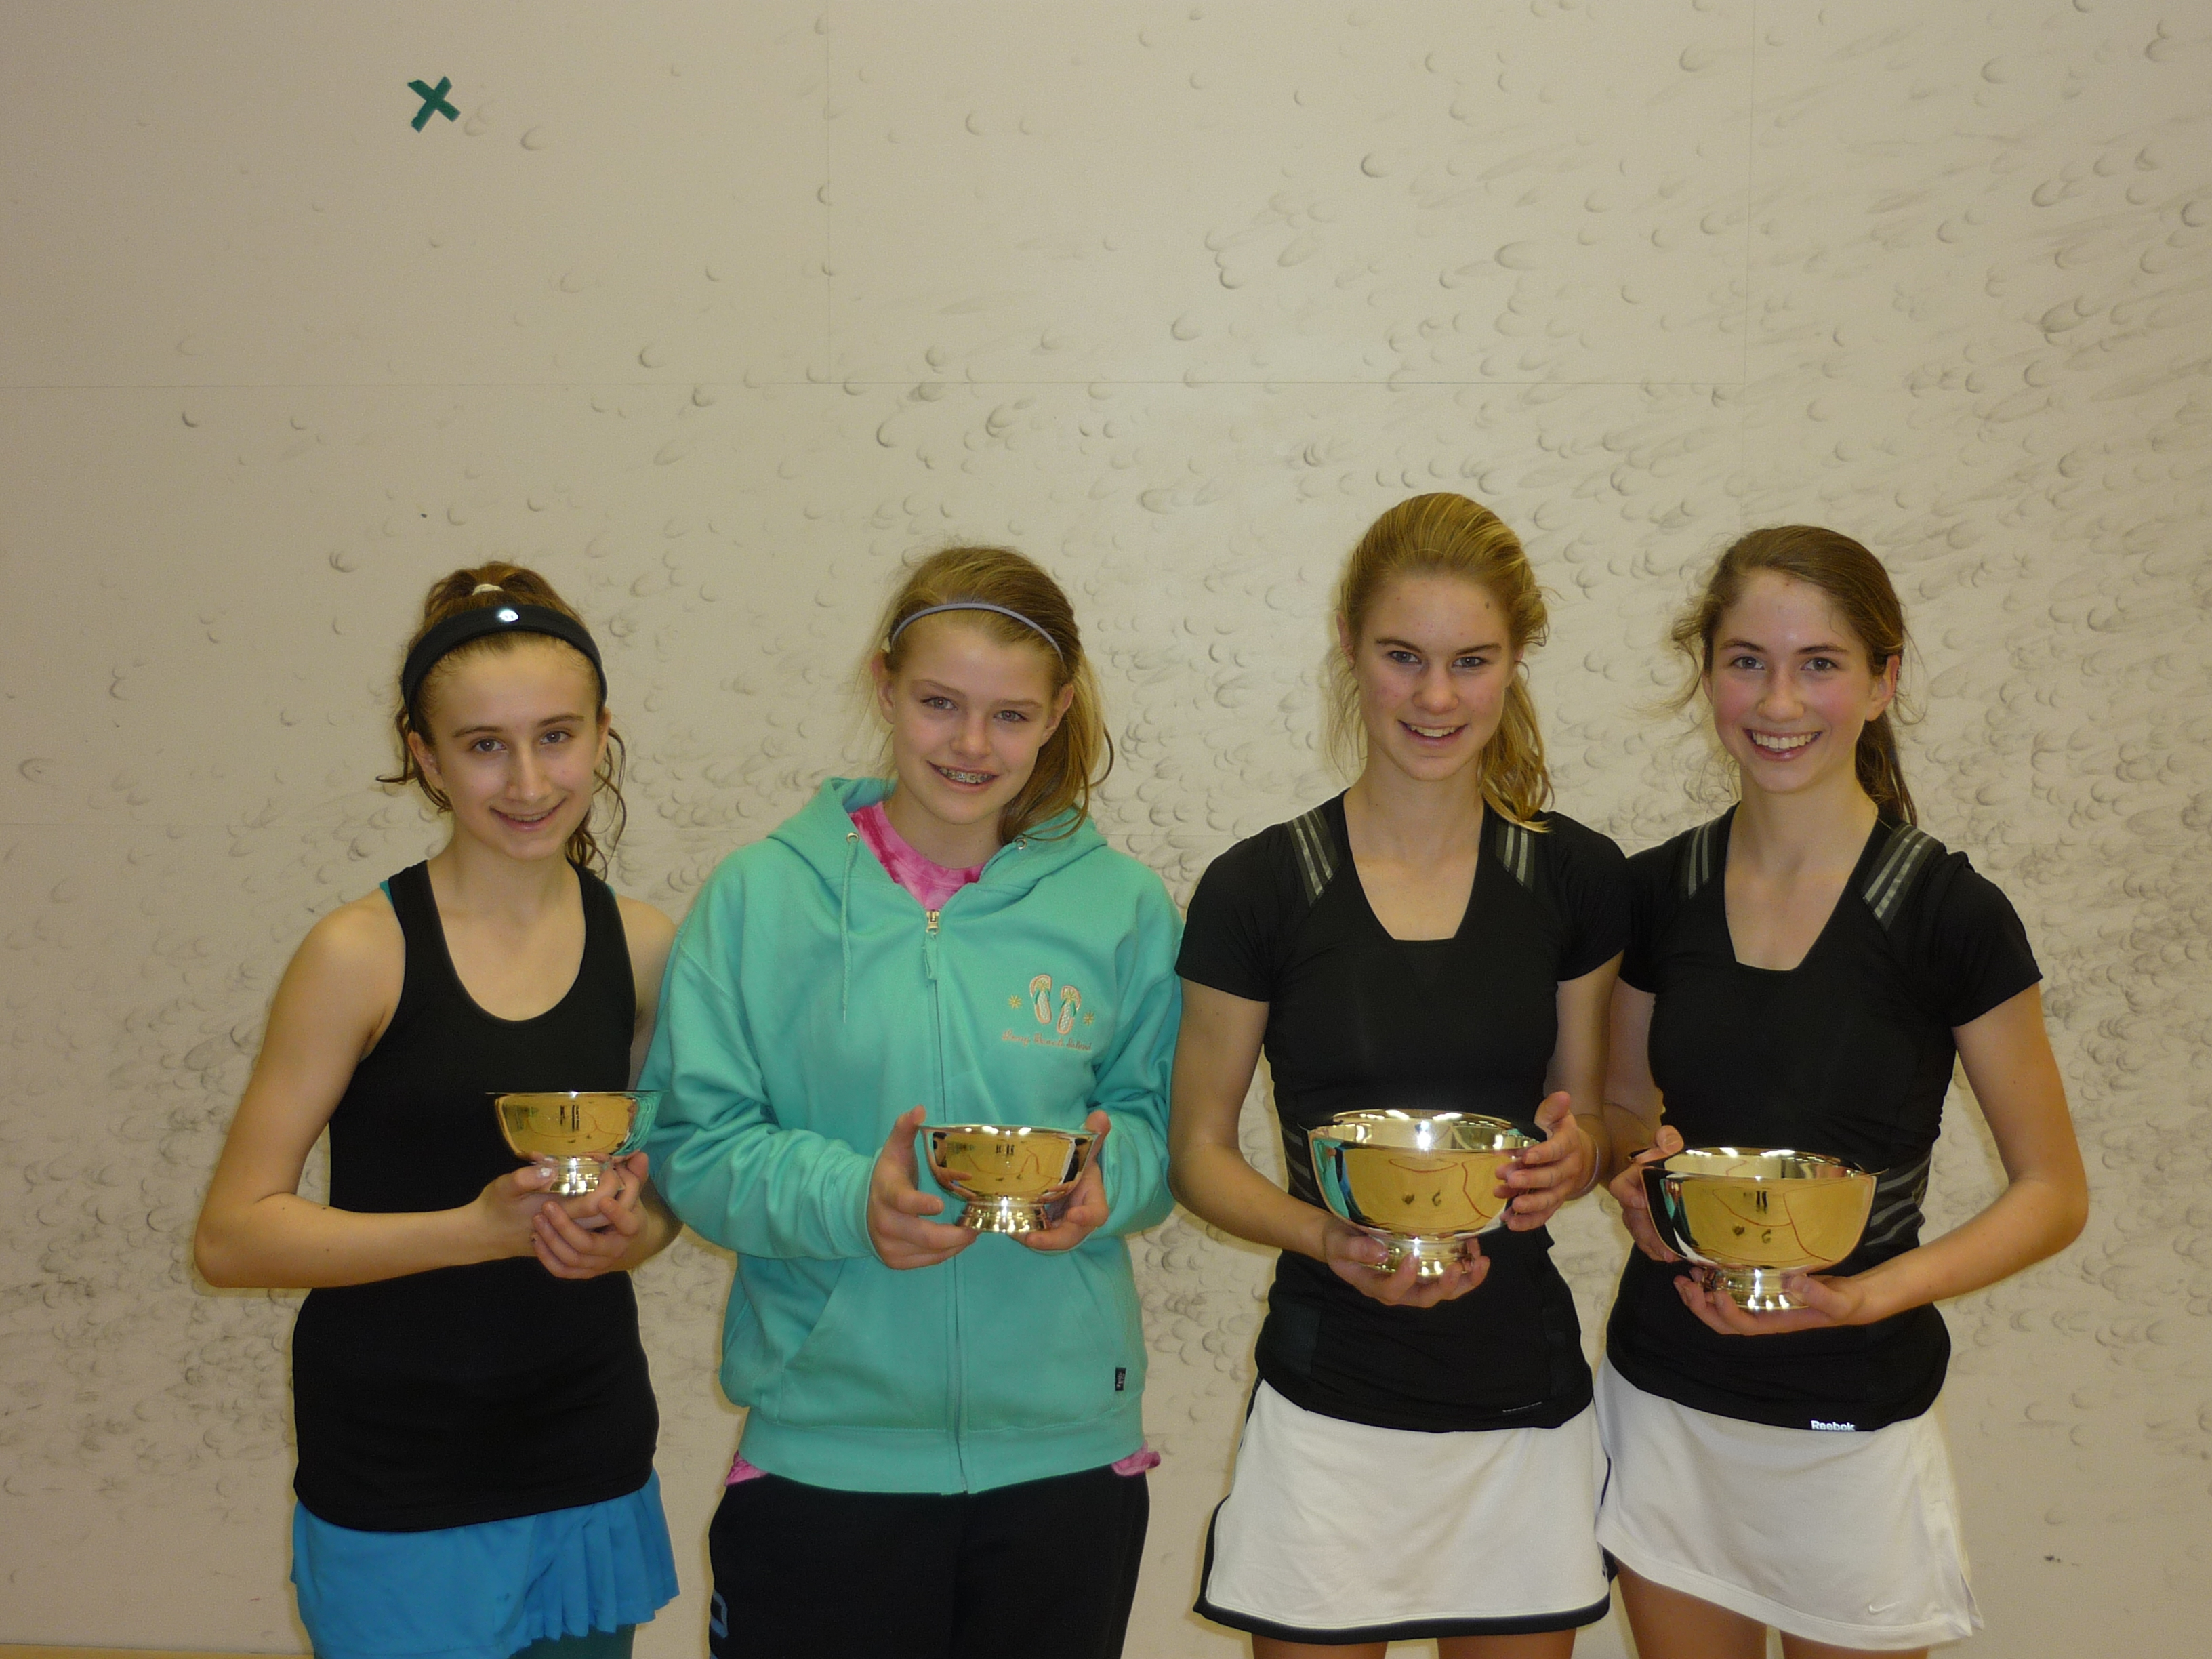 Girls U15 runners-up, Scarlett Bergam and Lindsay Stanley (defeated by Sawyer Chilton and Diane Tyson) managed to win the U17 division.